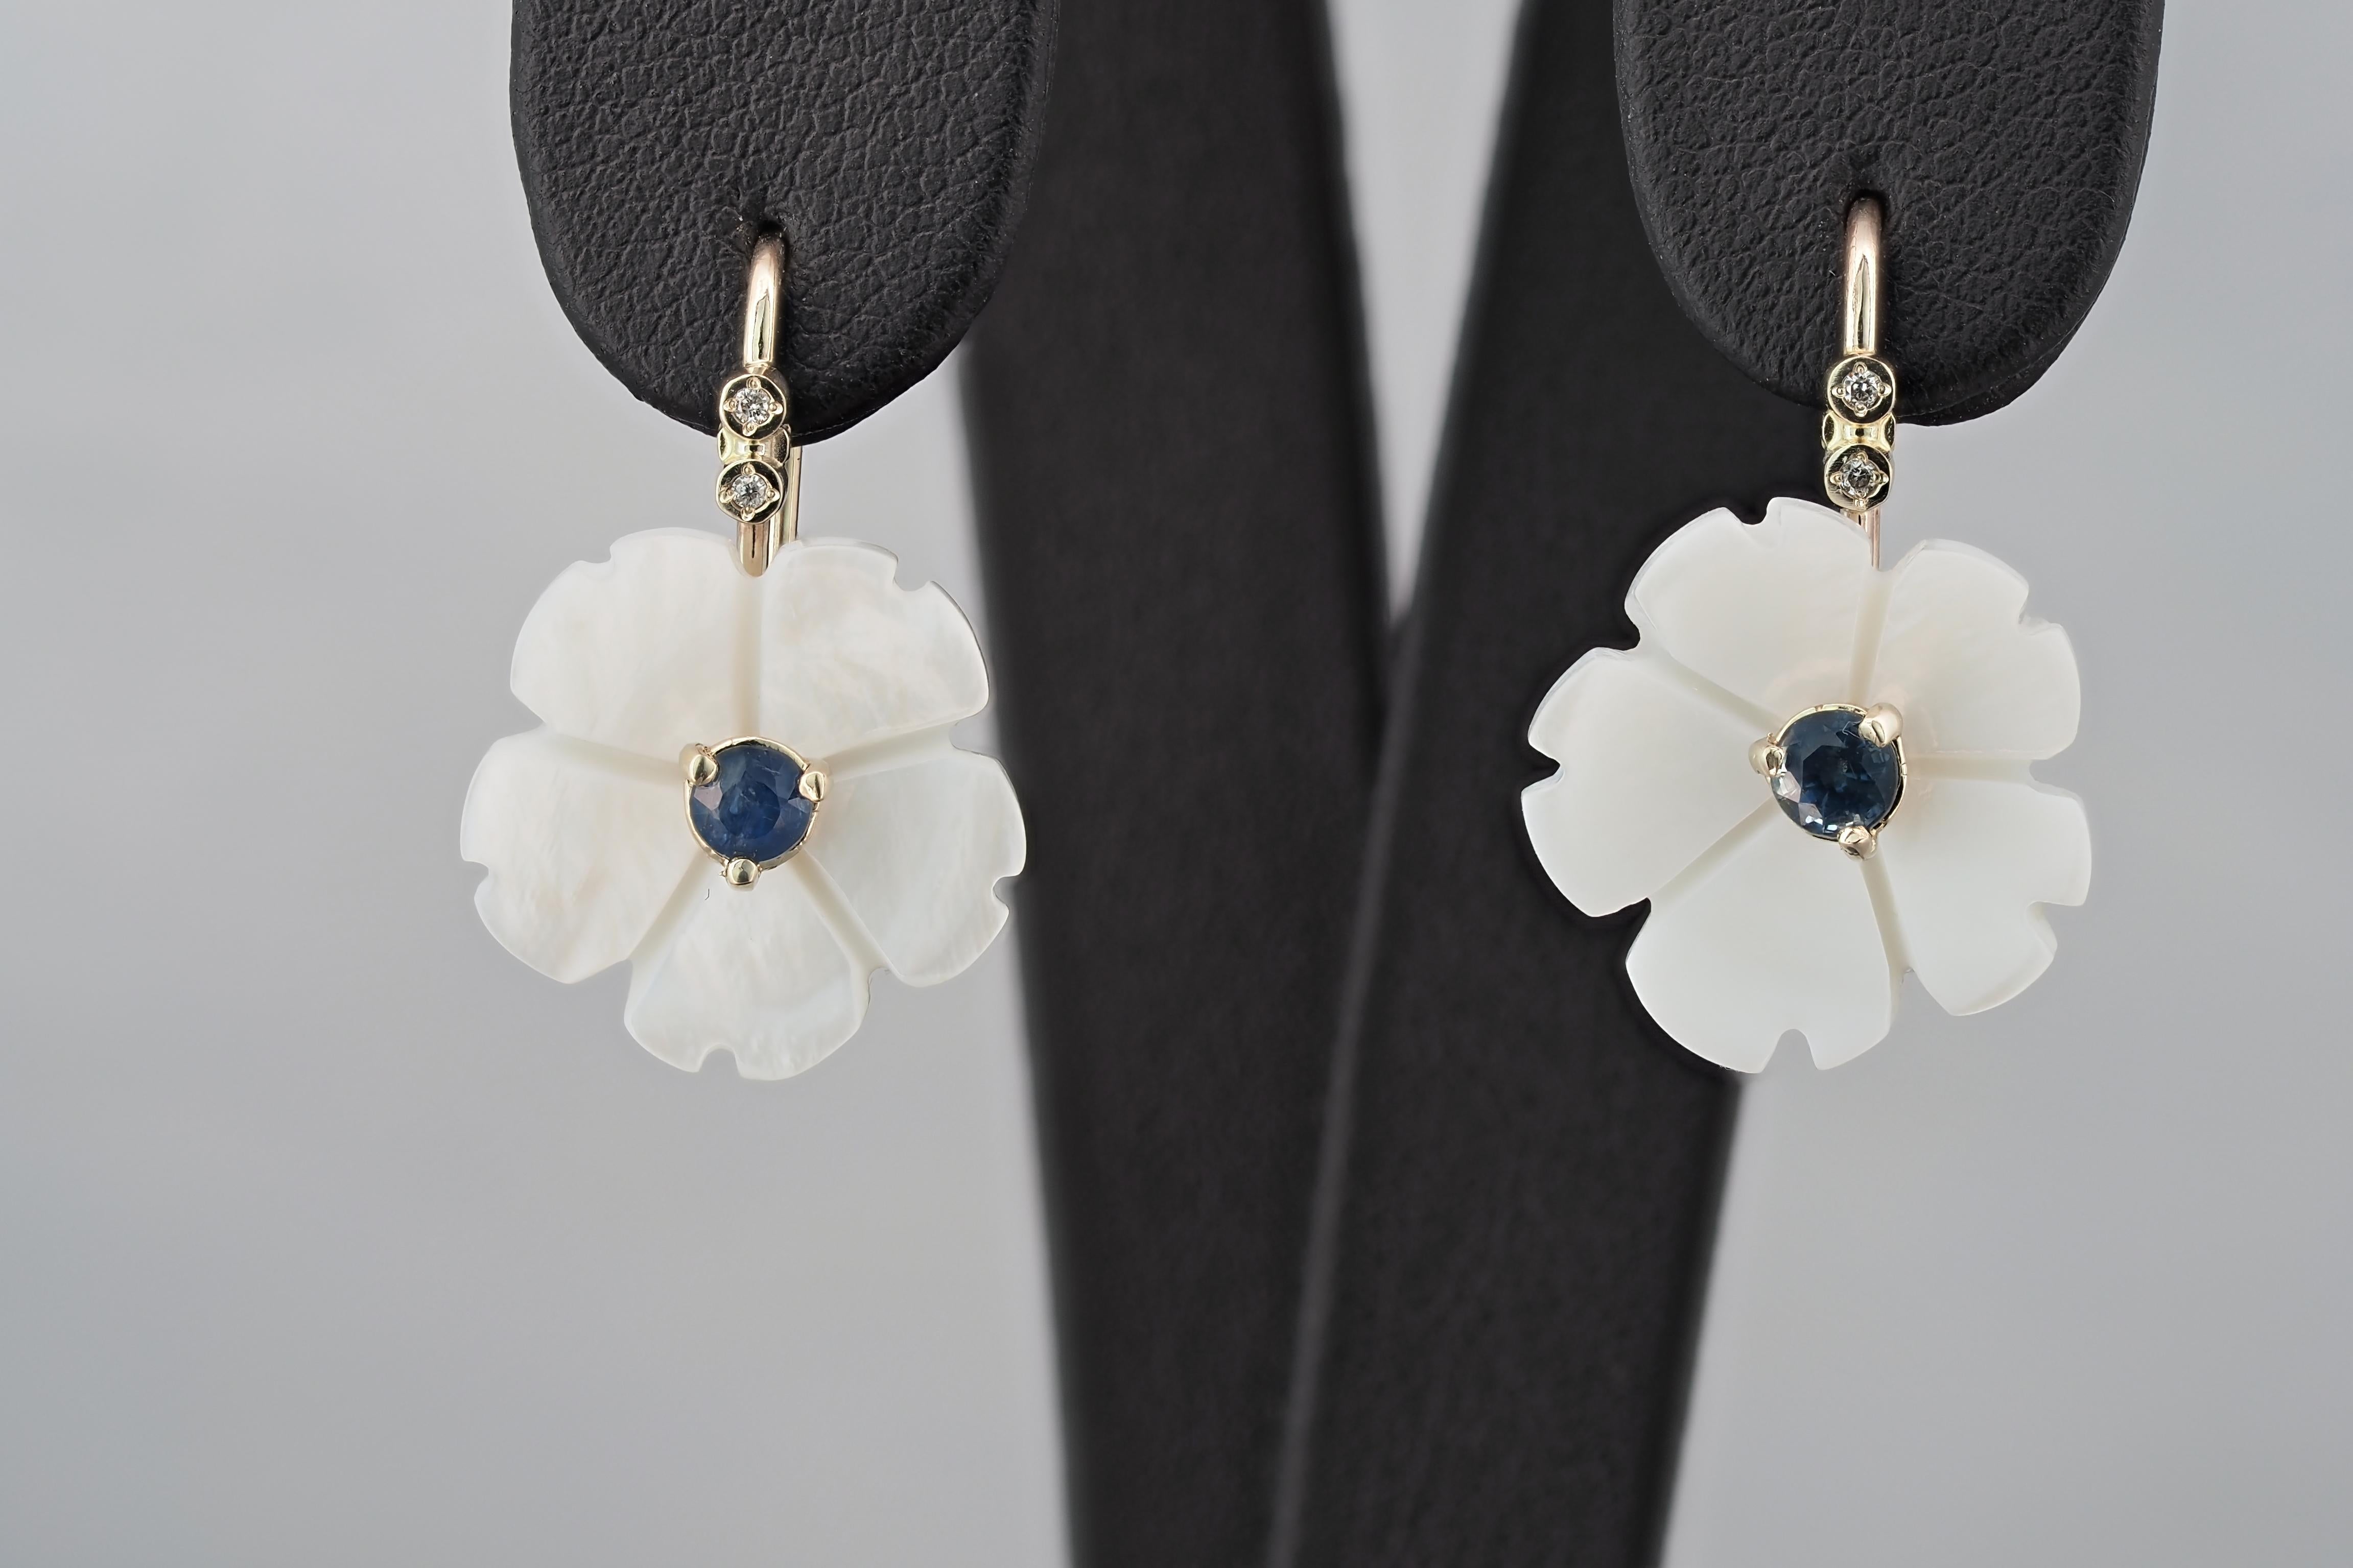 Flower 14k gold earrings with blue sapphires. 
Blue sapphires and carved mother of pearl earrings. Blue sapphires gold earrings.

Metal: 14k gold. 
Weight: 3 gr.

Central stone: Sapphires- 2 pieces 
Cut: Round  
Weight: aprx 0.25 ct. total. 
Color: